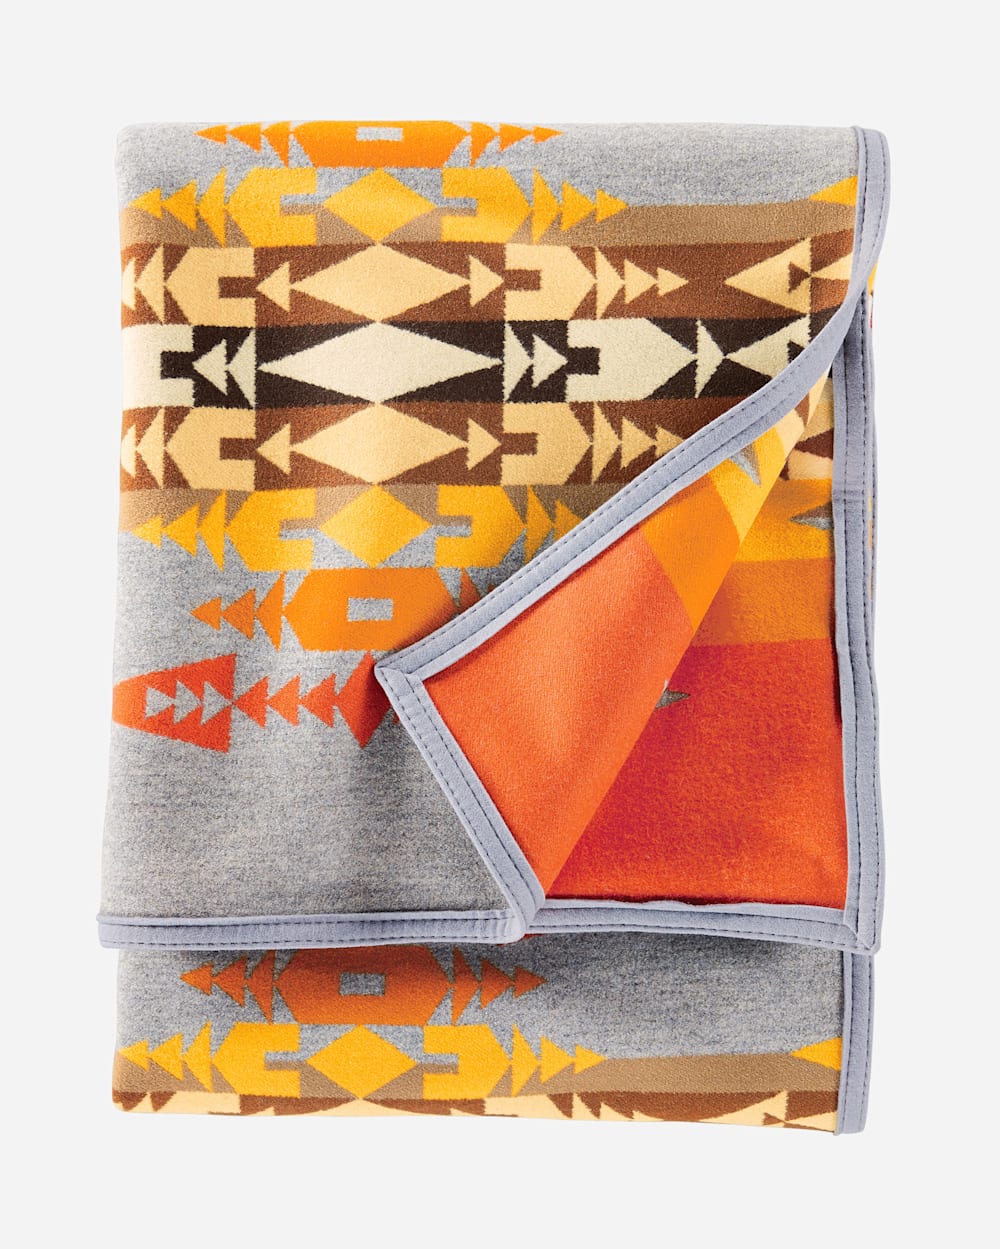 ADDITIONAL VIEW OF RIO CHAMA HERITAGE BLANKET IN GREY image number 3